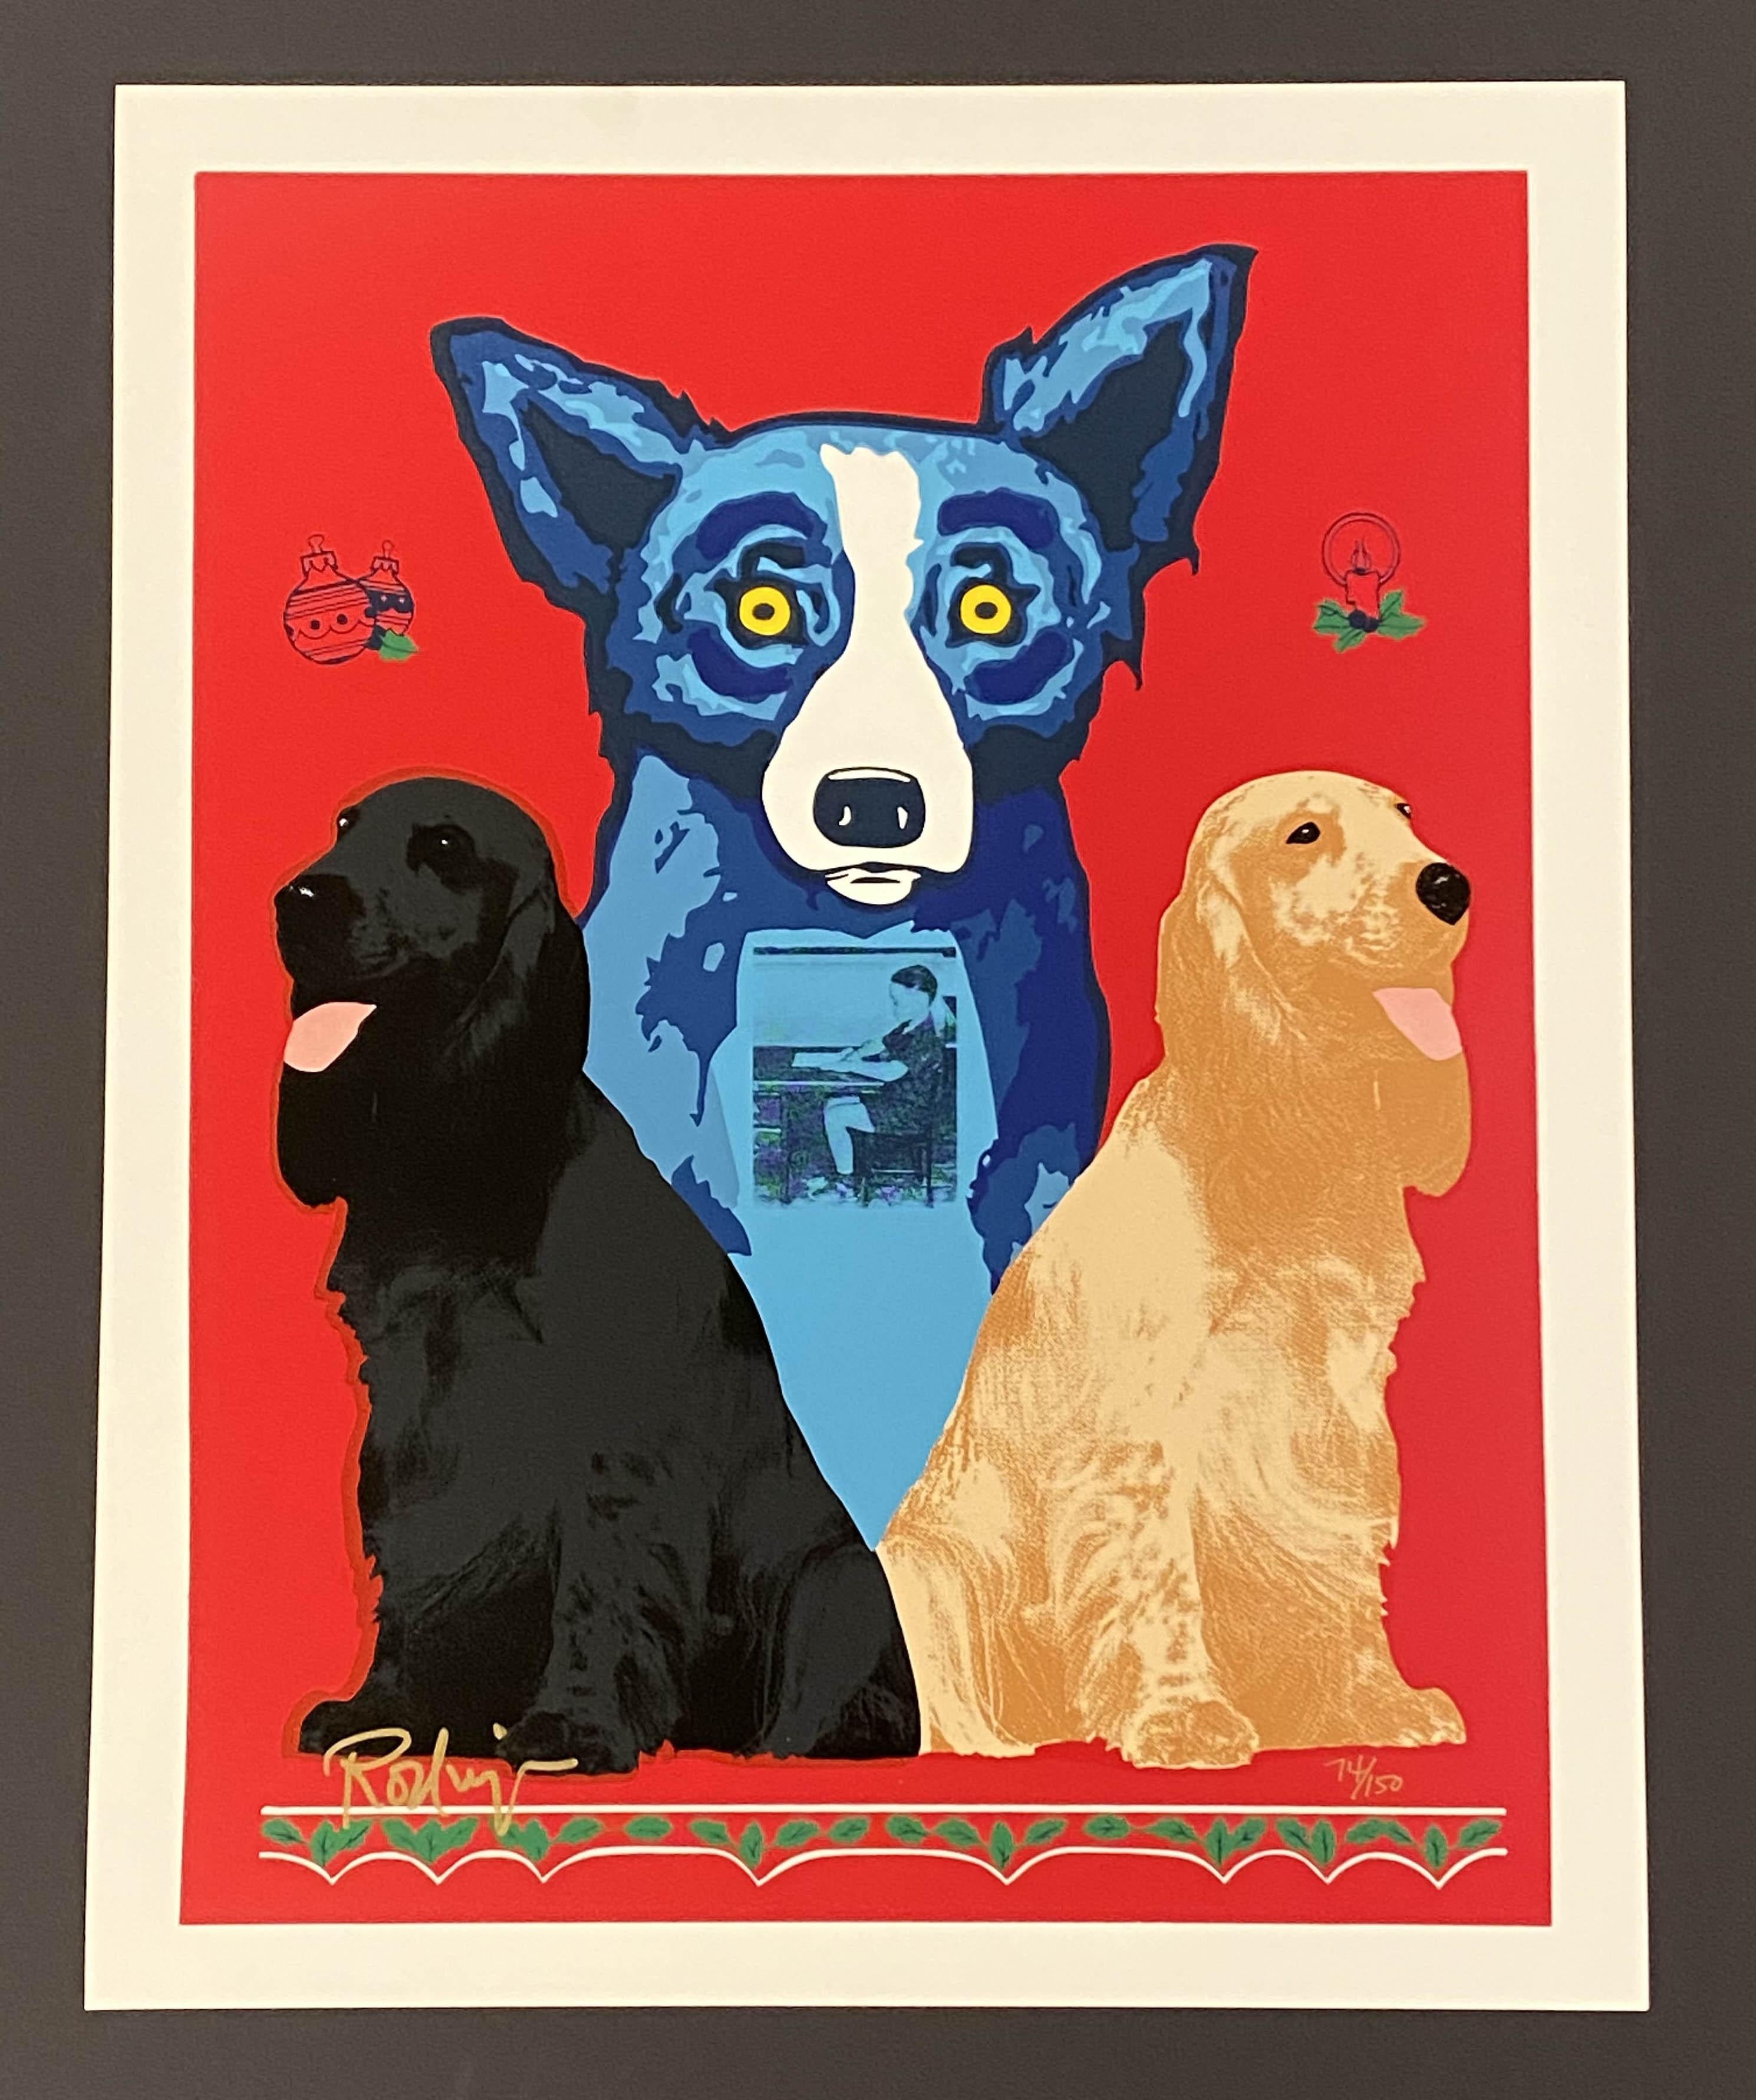 George's Sweet Inspirations - Print by George Rodrigue